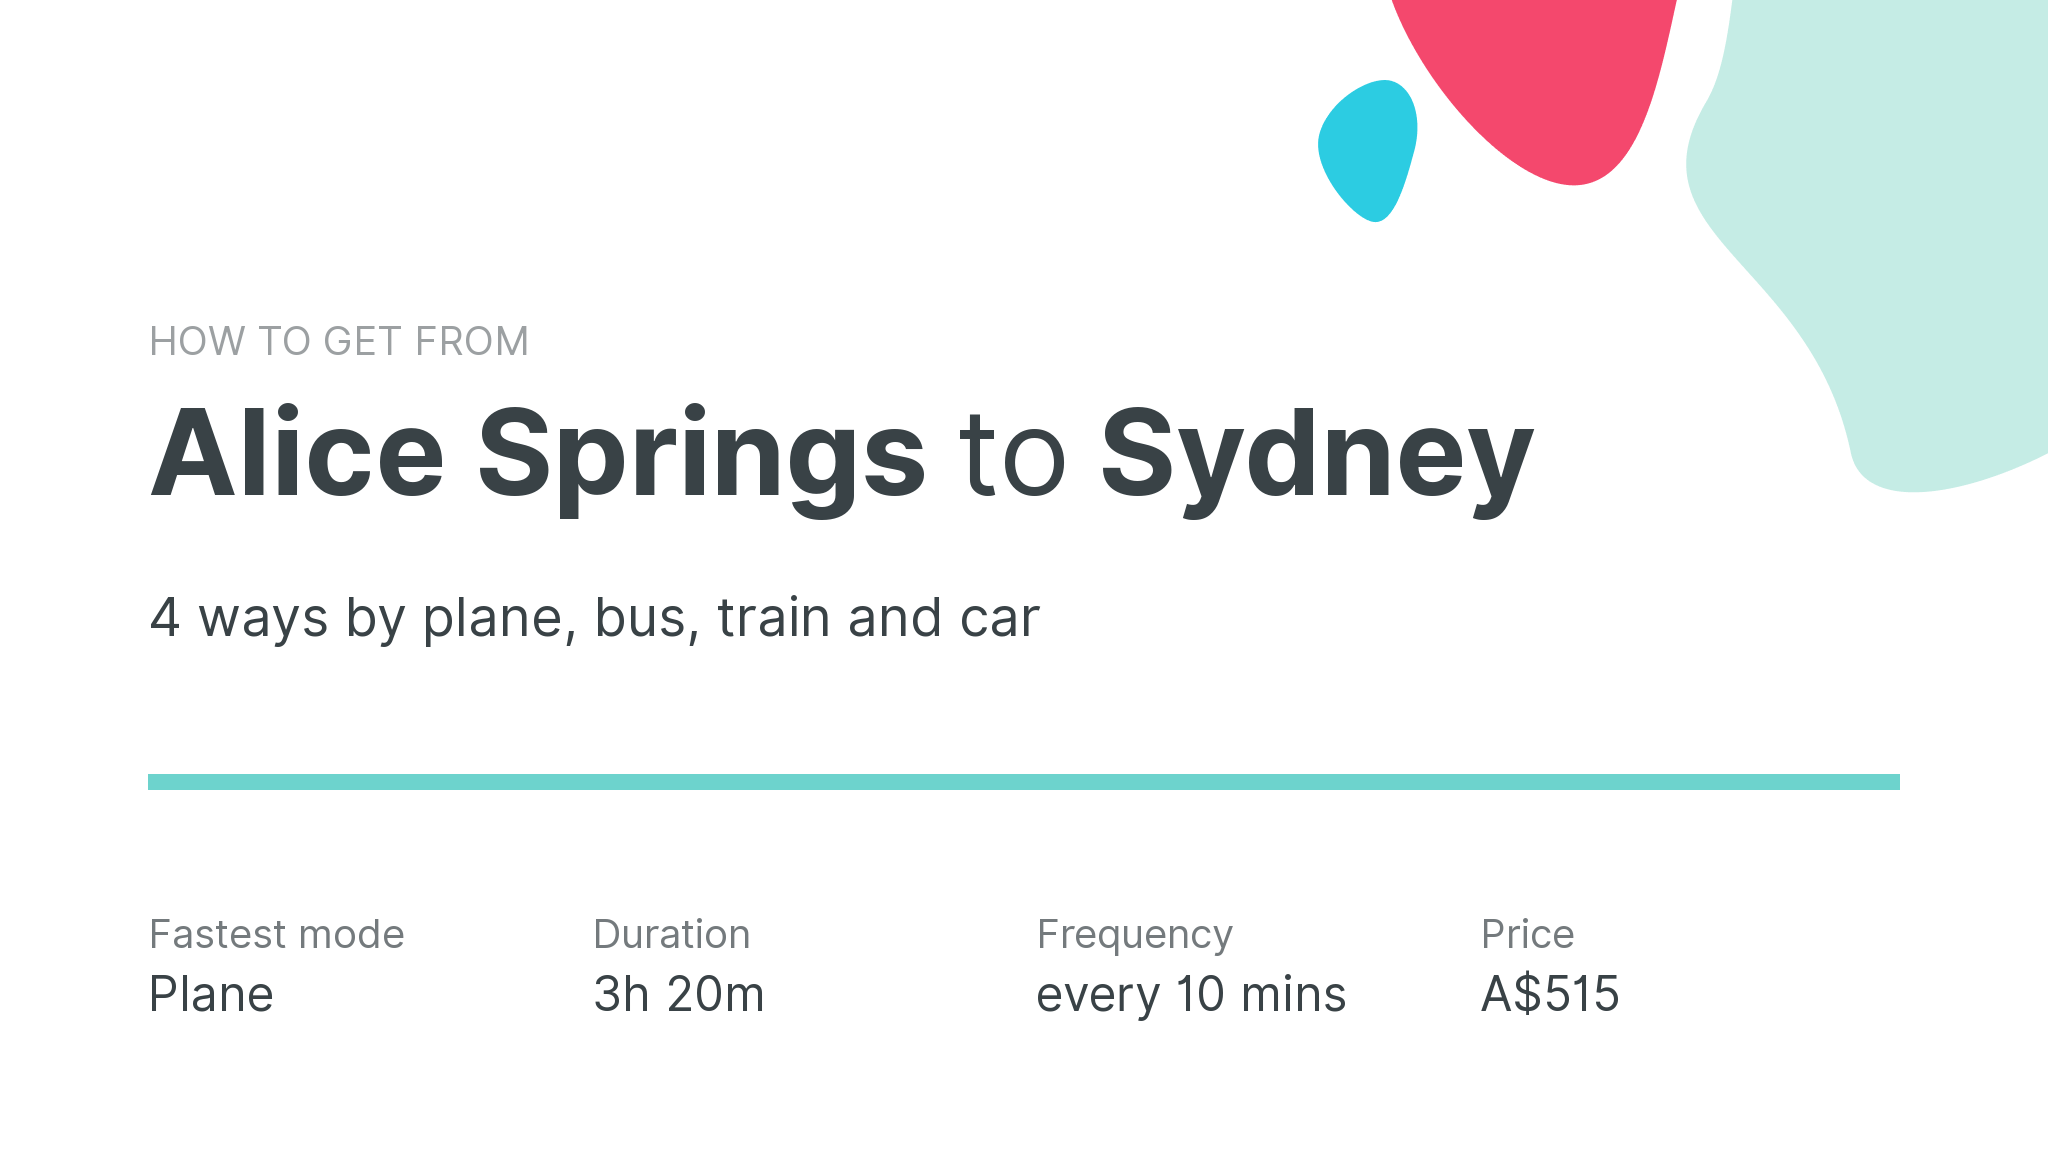 How do I get from Alice Springs to Sydney